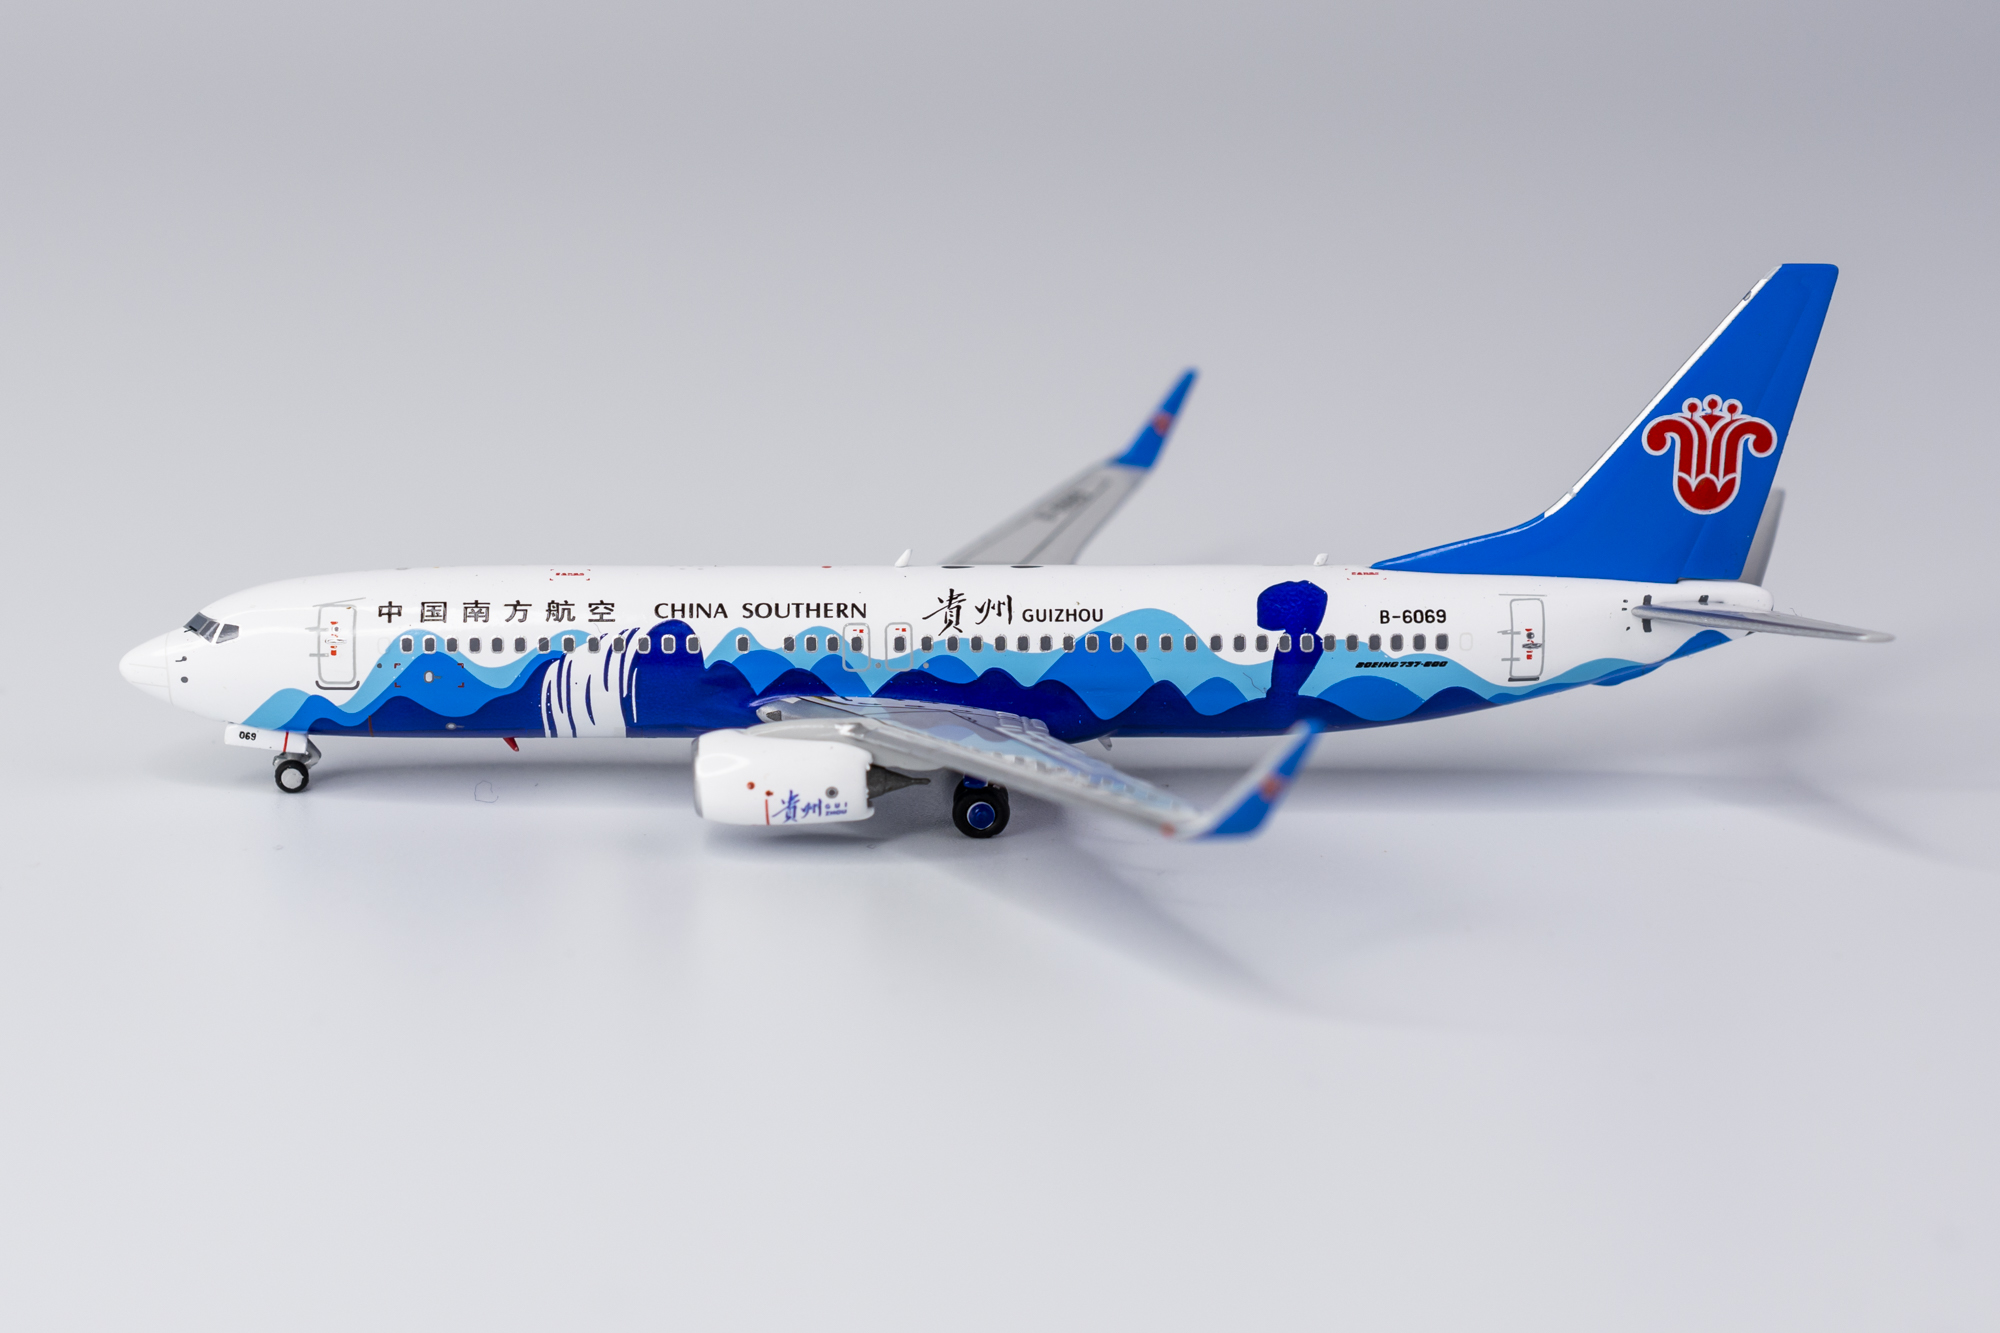 China Airplane Model, Airplane Model Wholesale, Manufacturers